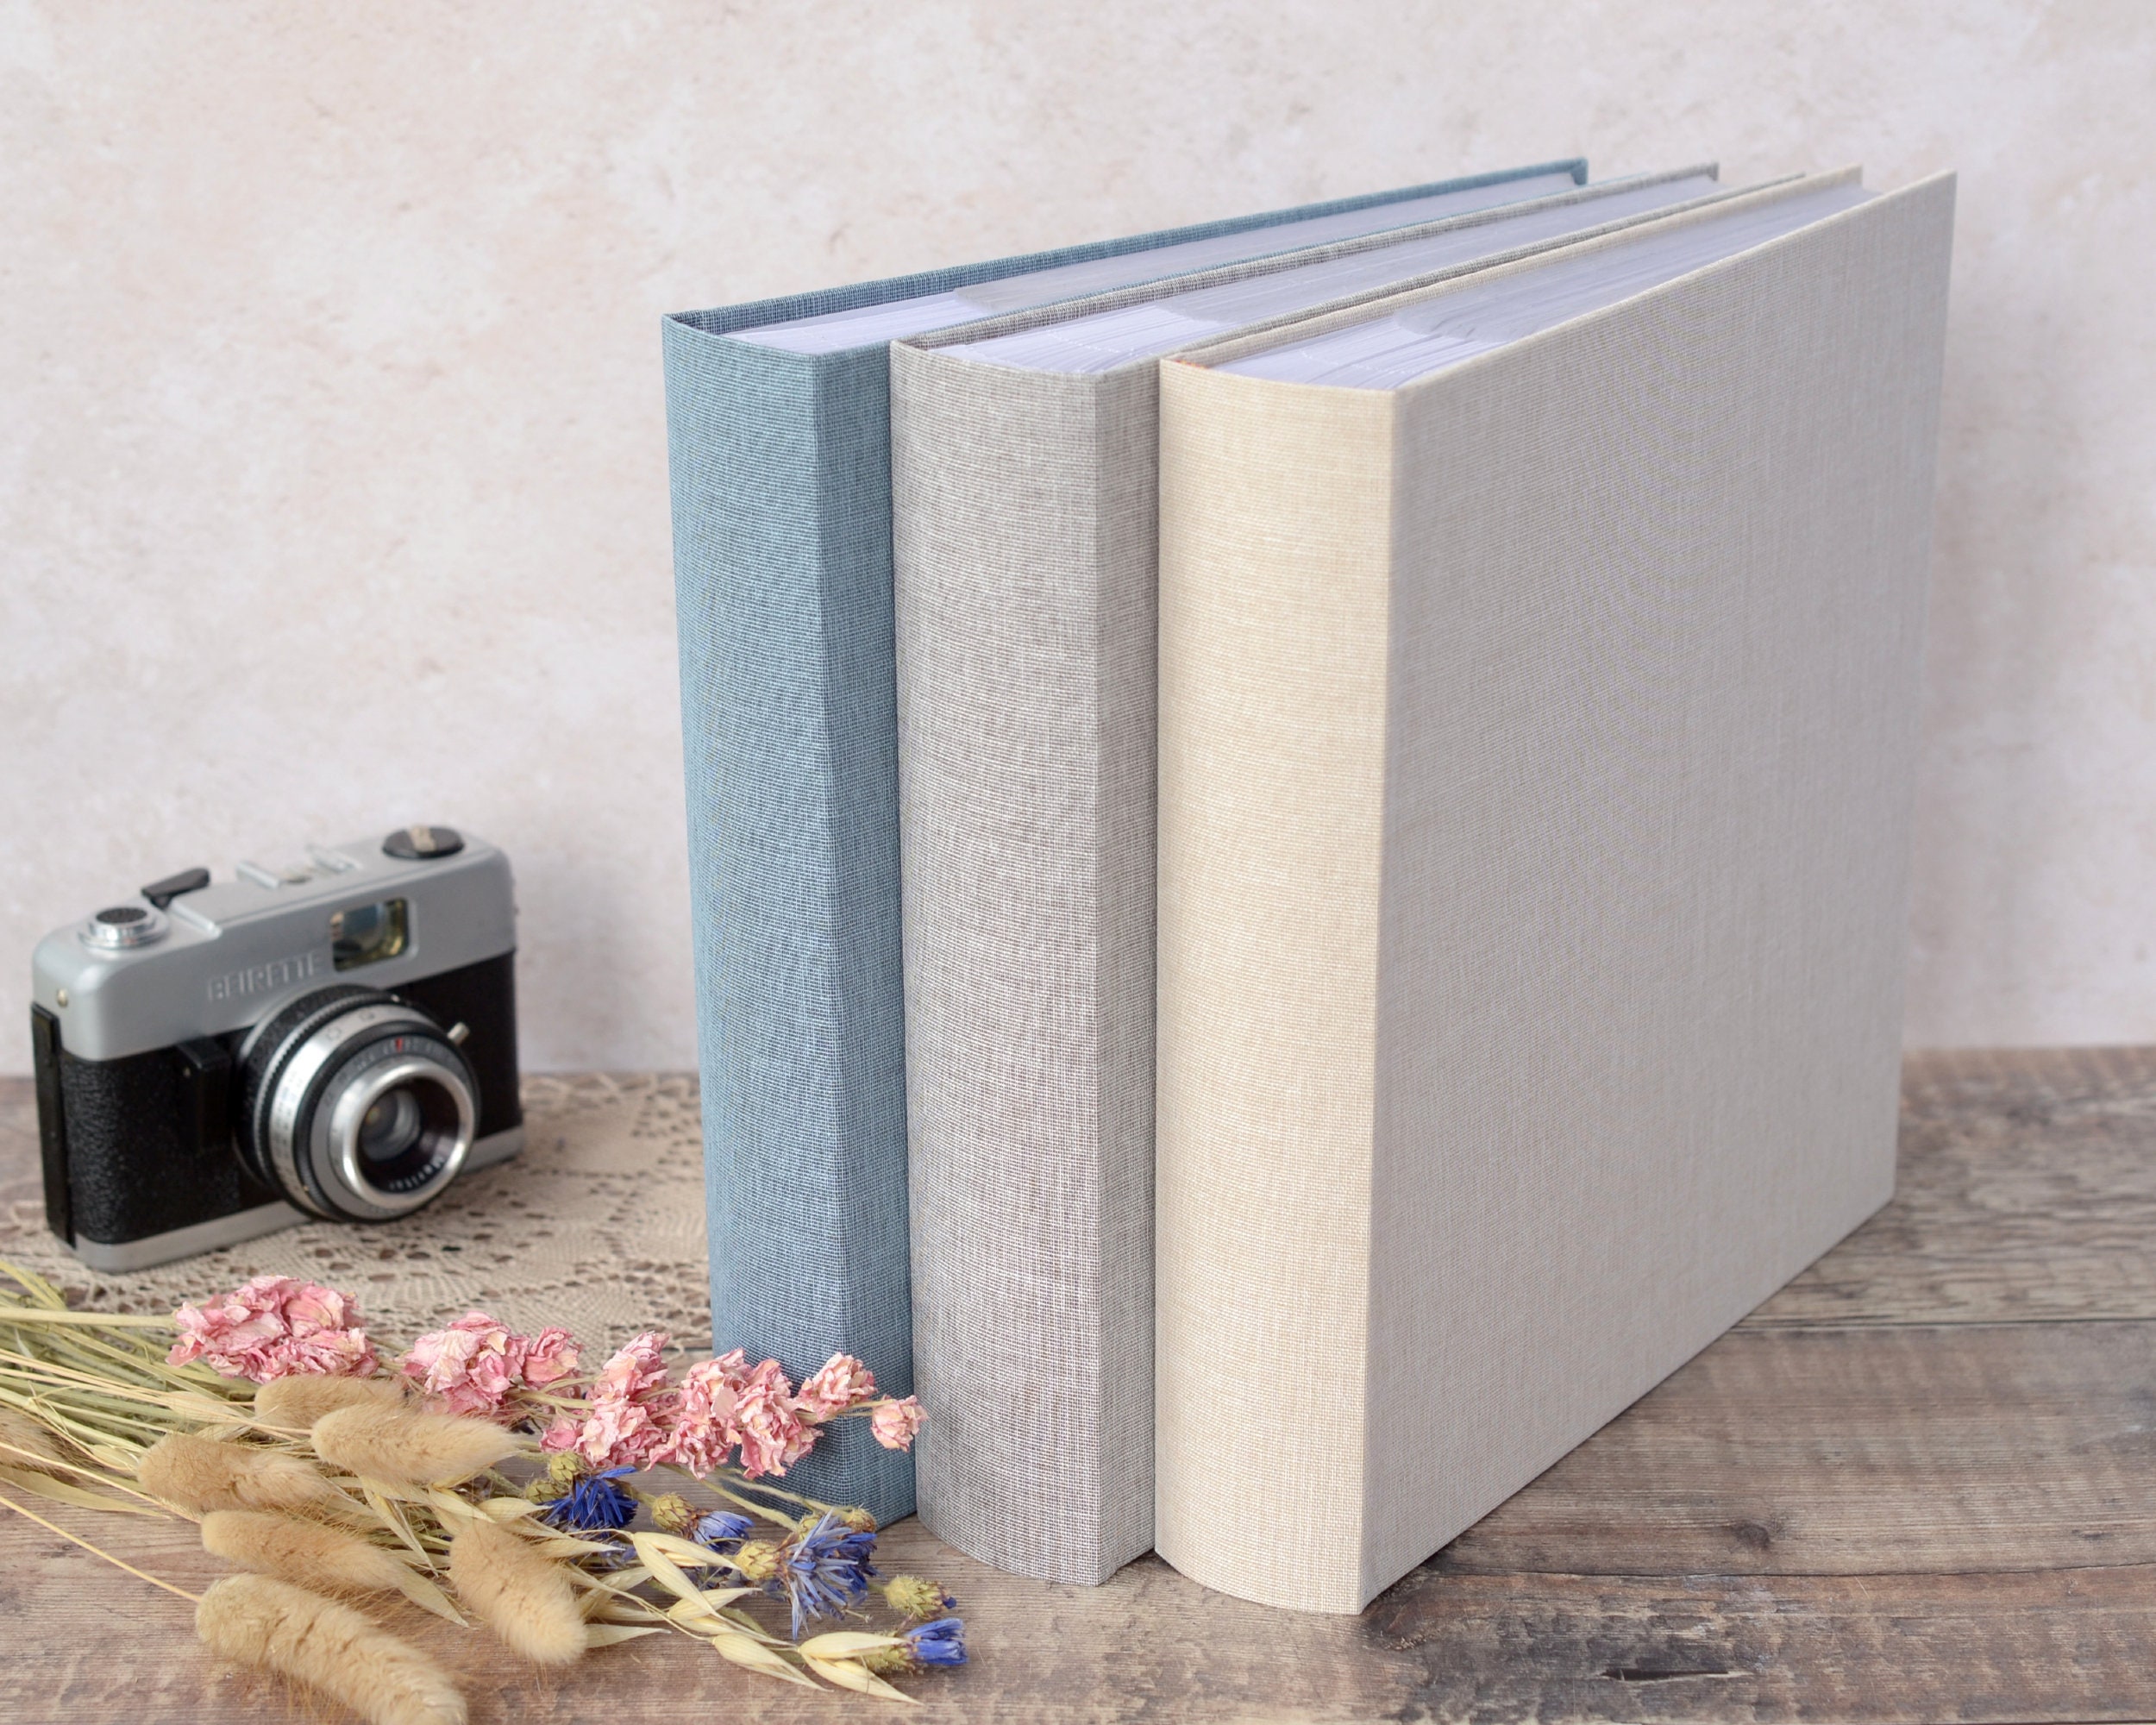 Photo Album 4x6 220 Photos with Memo Slip-in Pockets, Premium Leather Cover  Picture Albums 4x6 with Writing Space Hold Horizontal Photos for Wedding